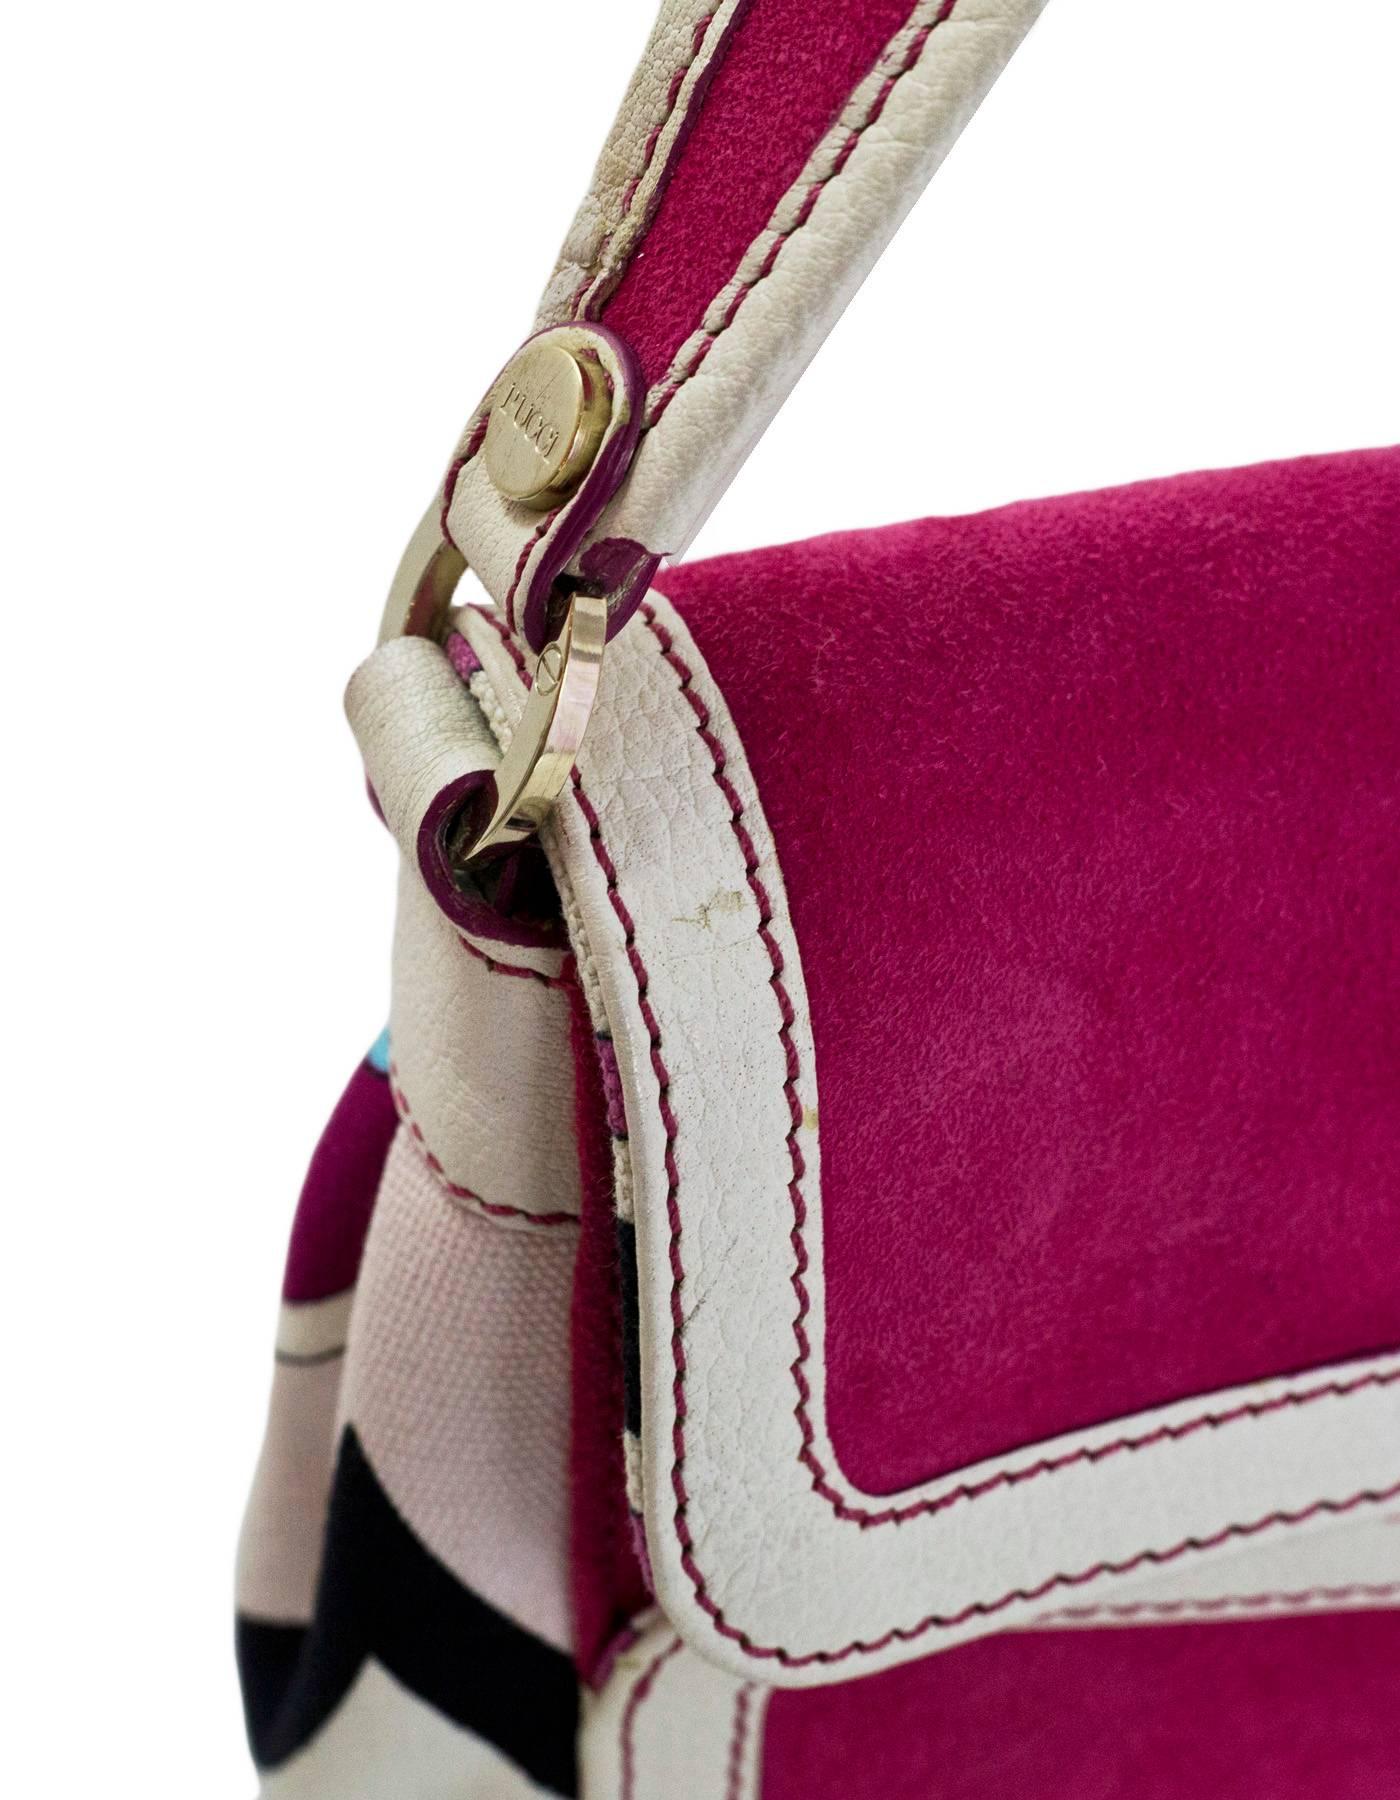 Emilio Pucci Pink Suede & White Leather Buckle Shoulder Bag 2